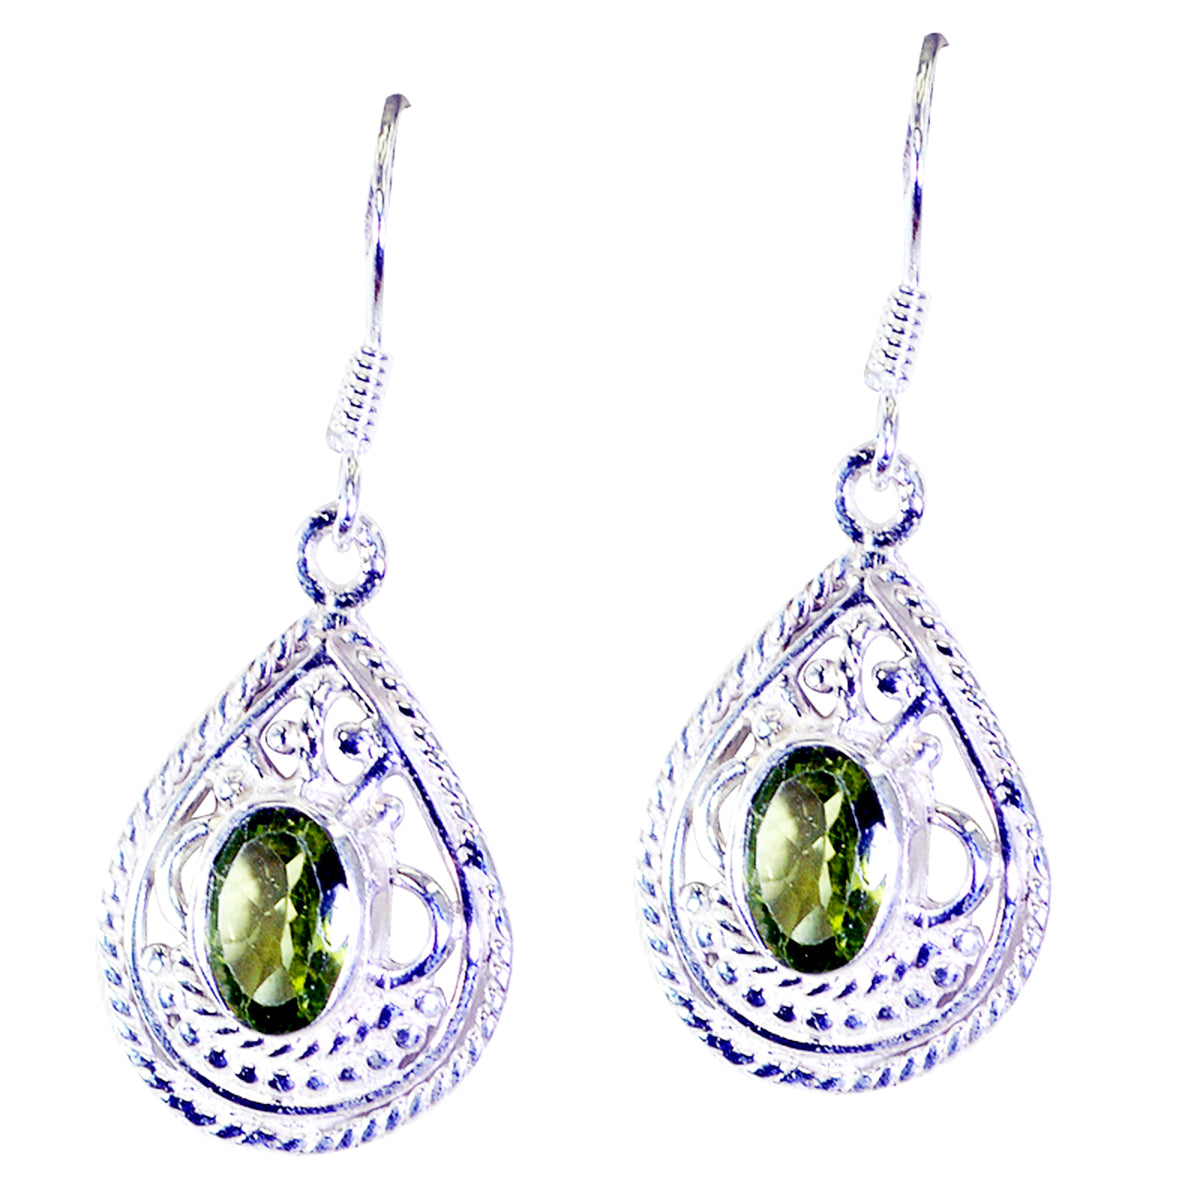 Riyo Genuine Gems oval Faceted Green Peridot Silver Earring gift for college